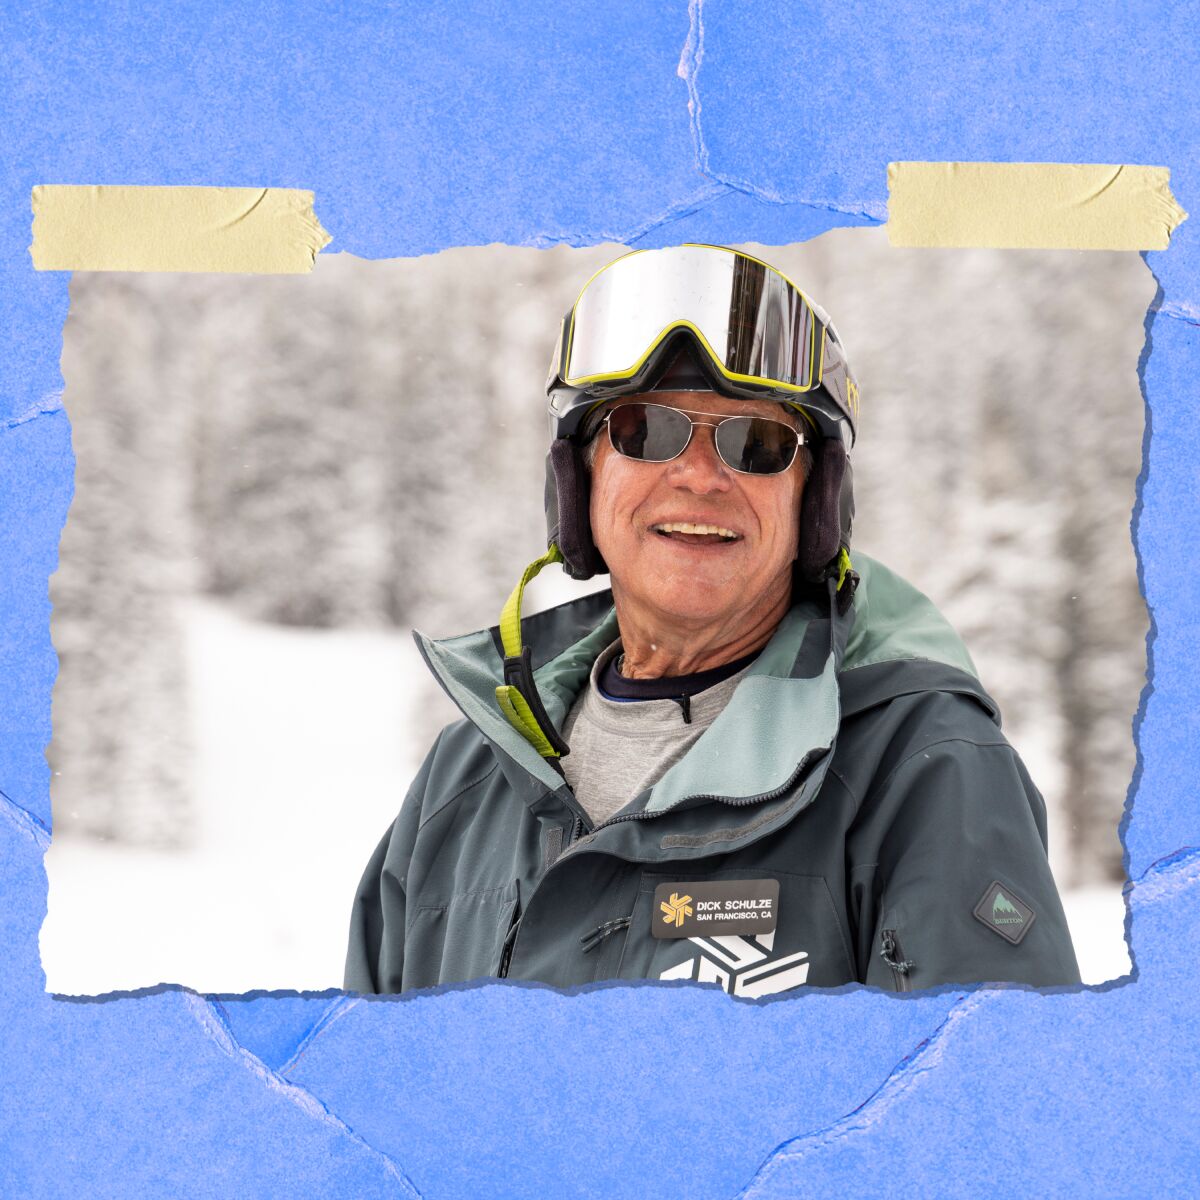 Dick Schulze, America's oldest competitive snowboarder.